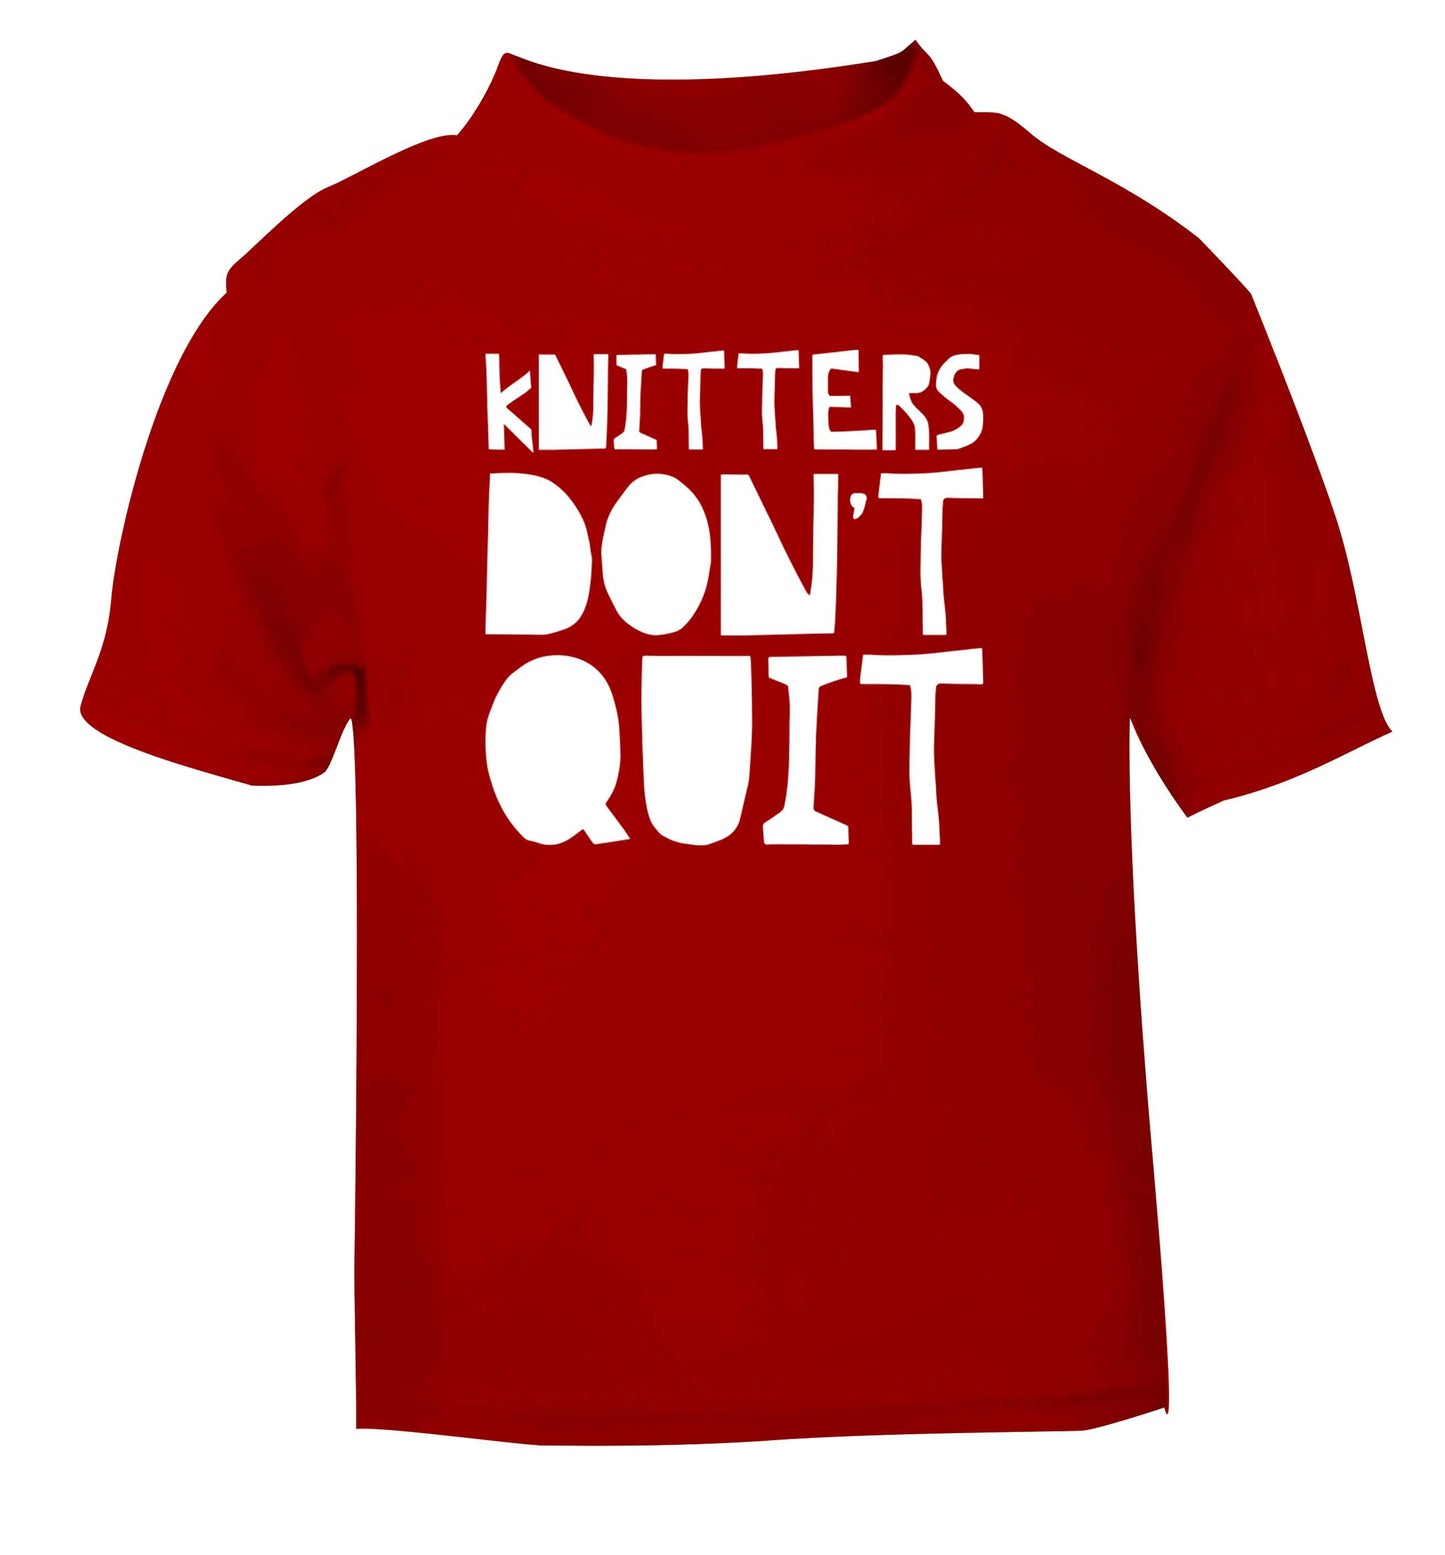 Knitters don't quit red Baby Toddler Tshirt 2 Years